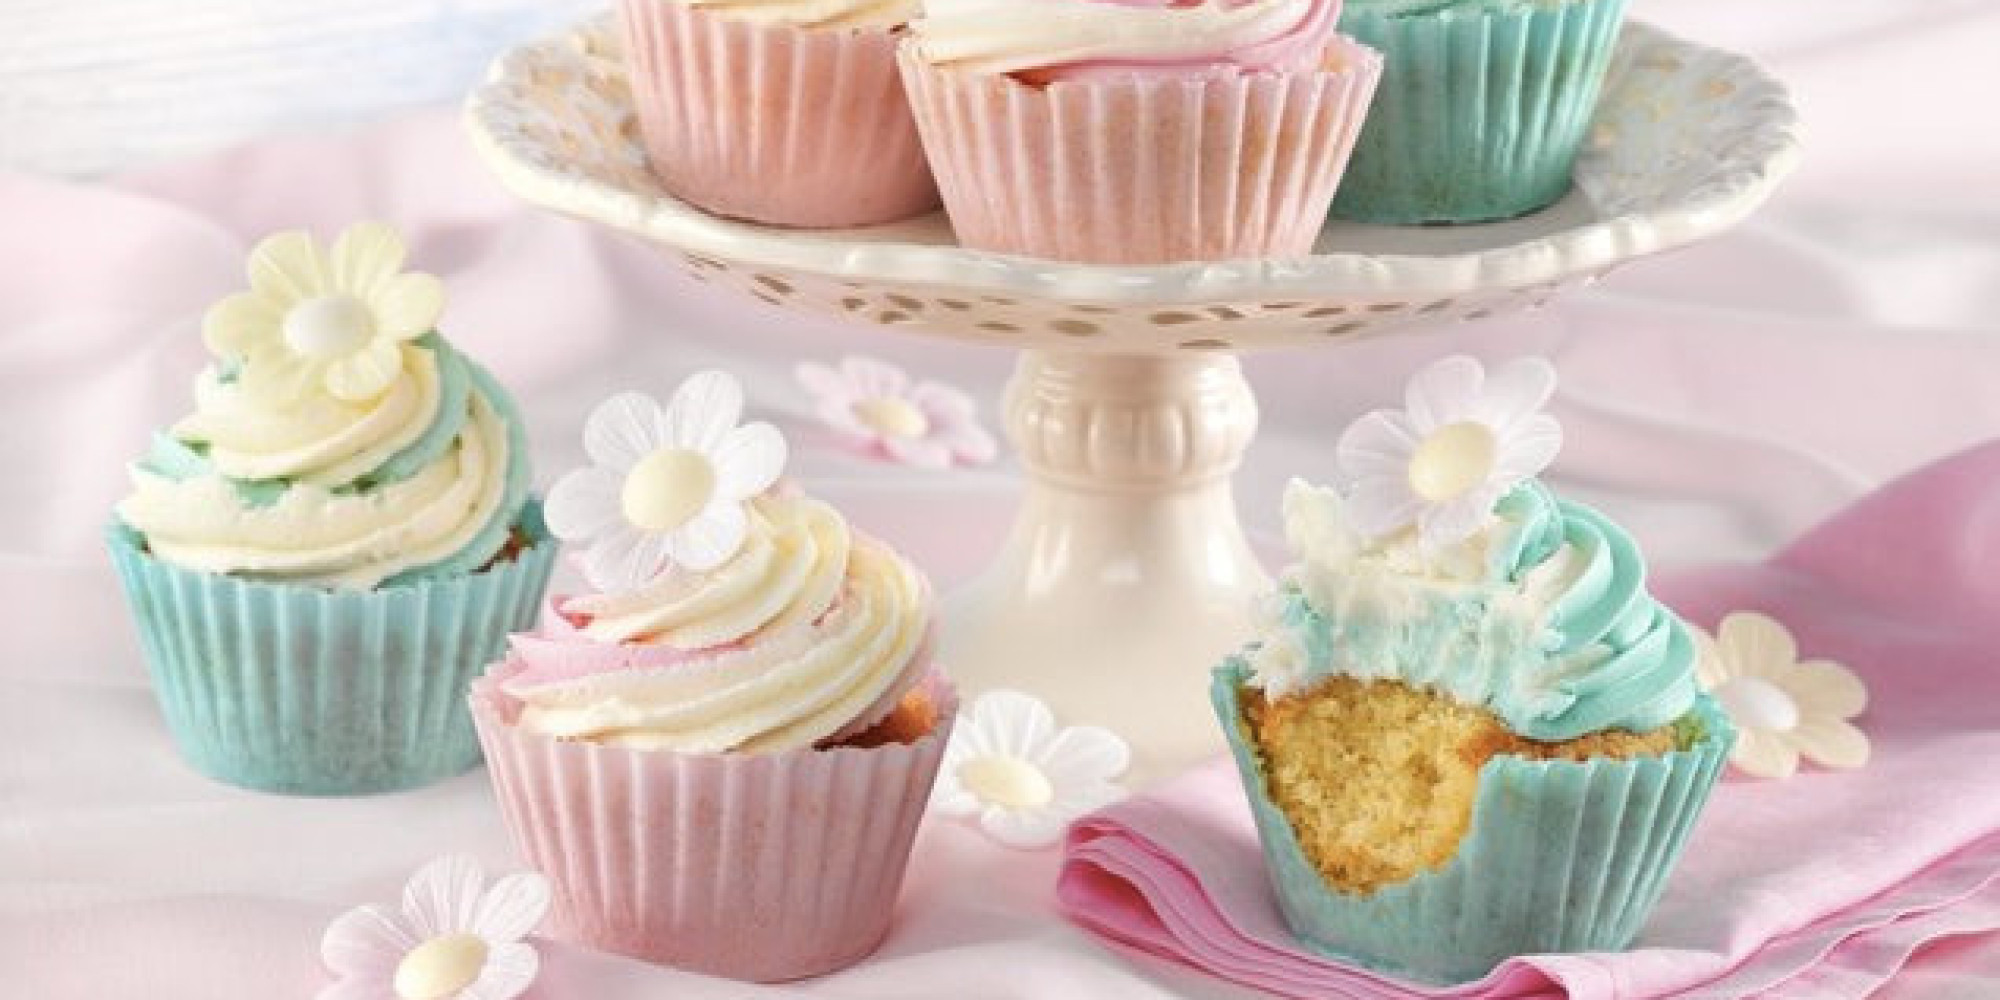 edible-wrappers-let-you-eat-cupcakes-with-reckless-abandon-huffpost